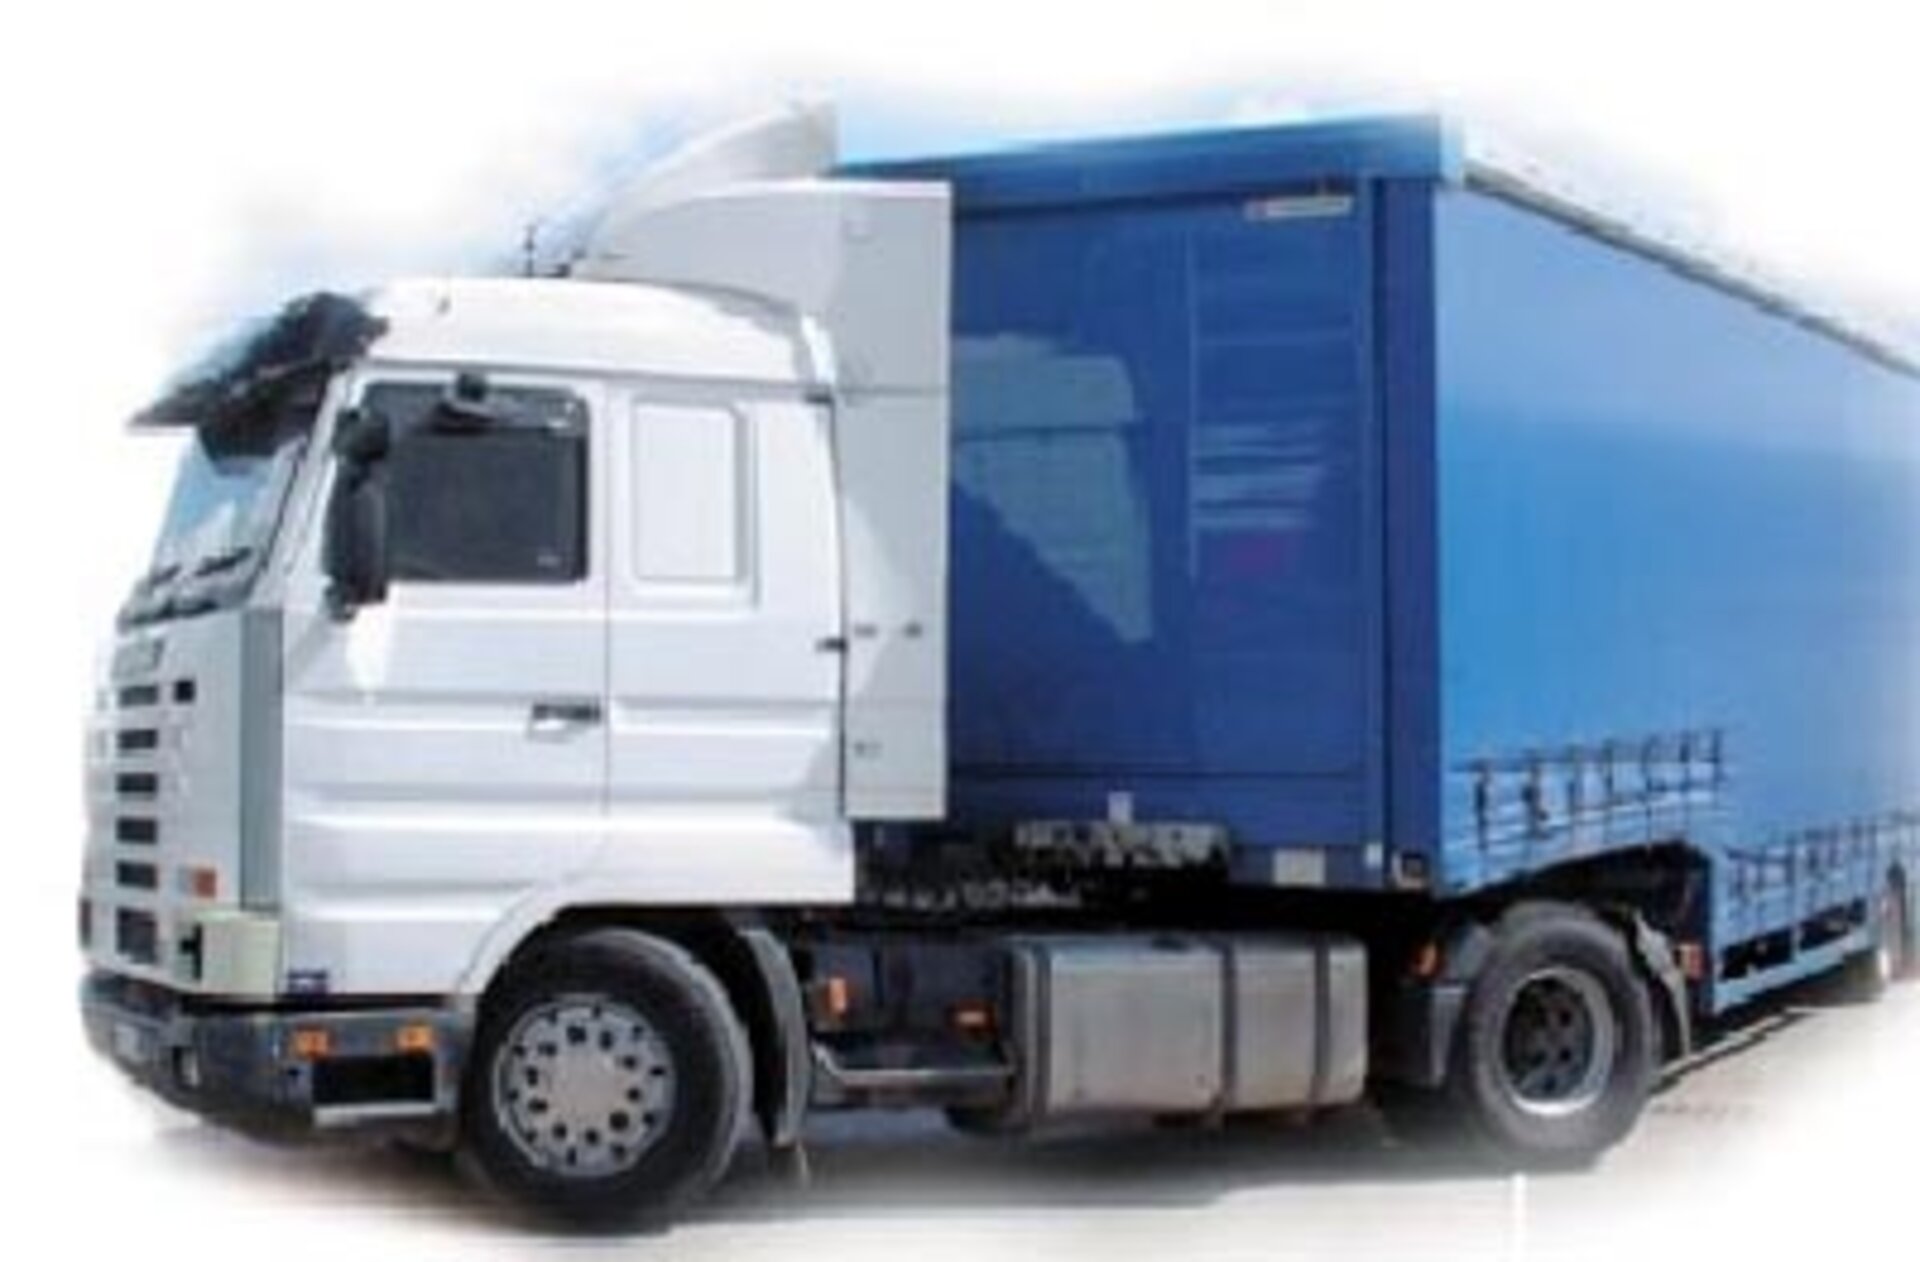 Ariane launcher textile protects lorries